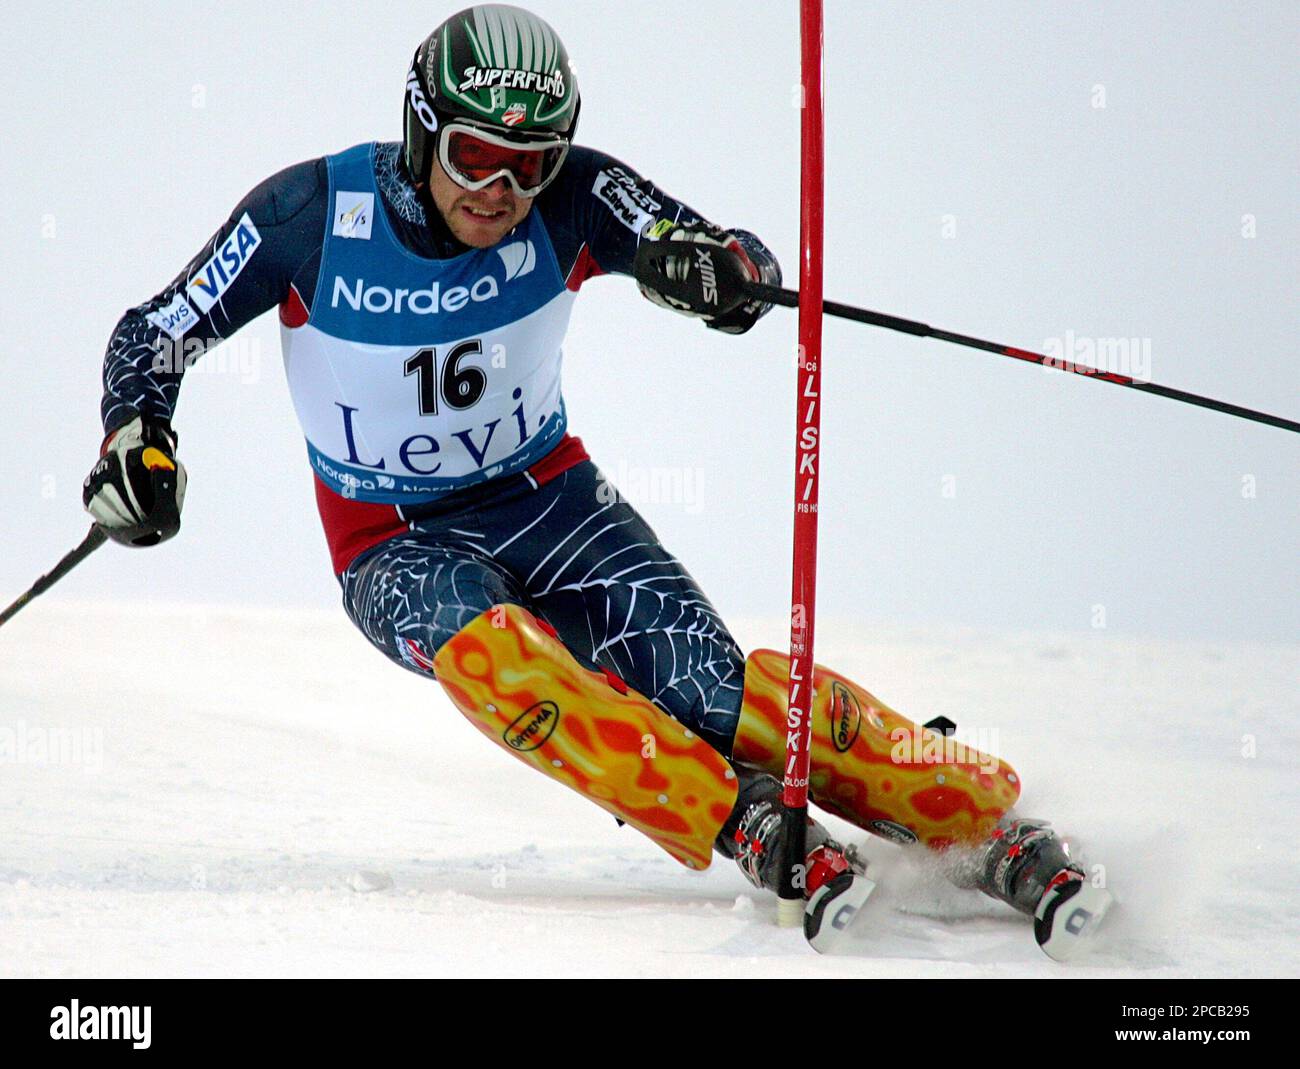 Usa's Bode Miller, the former World Cup overall winner, slaloms past a pole  during the men's ski World Cup opening slalom in Levi, Finland, Sunday,Nov.  12 2006. Austria's Benjamin Raich, who won